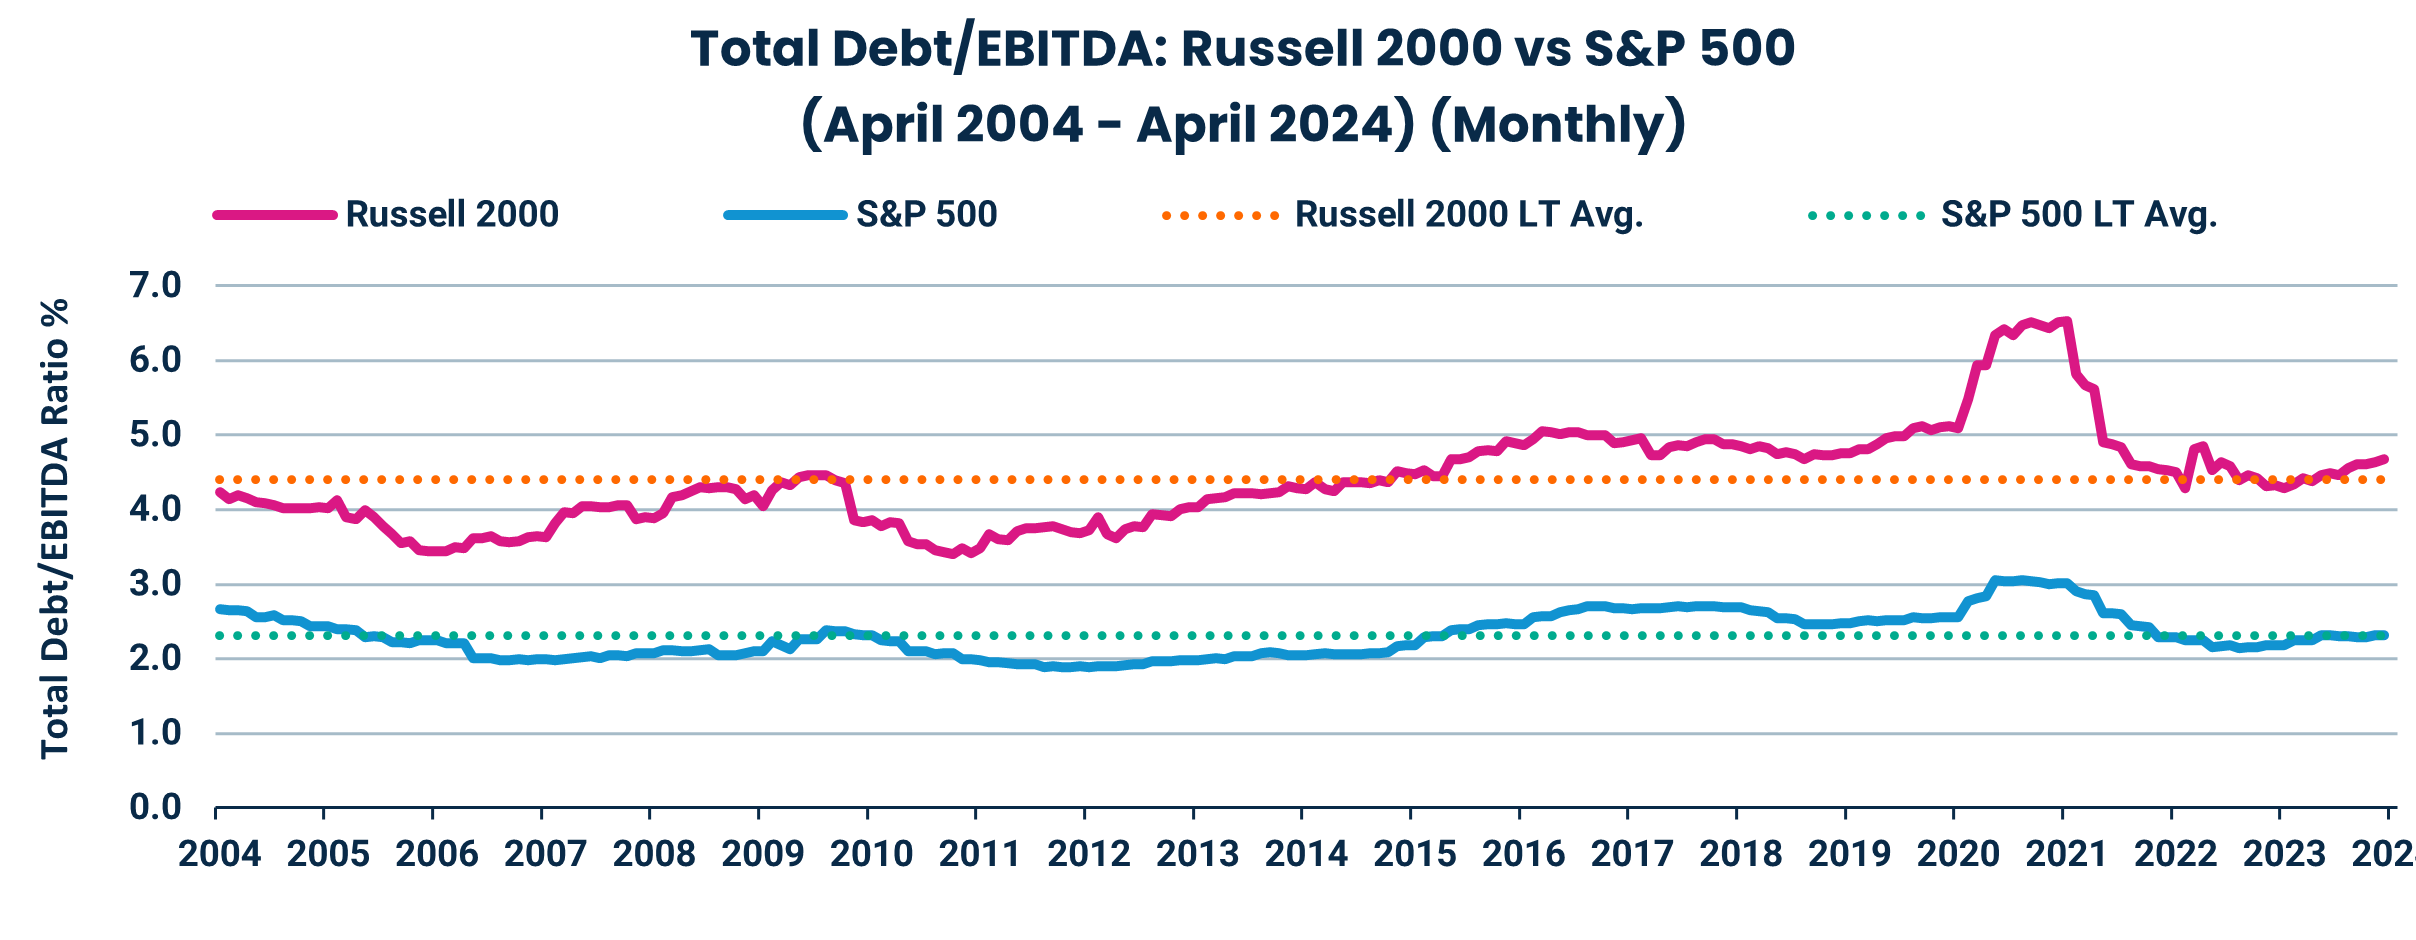 Total Debt/EBITDA: Russell 2000 vs S&P 500
(April 2004 - April 2024) (Monthly)